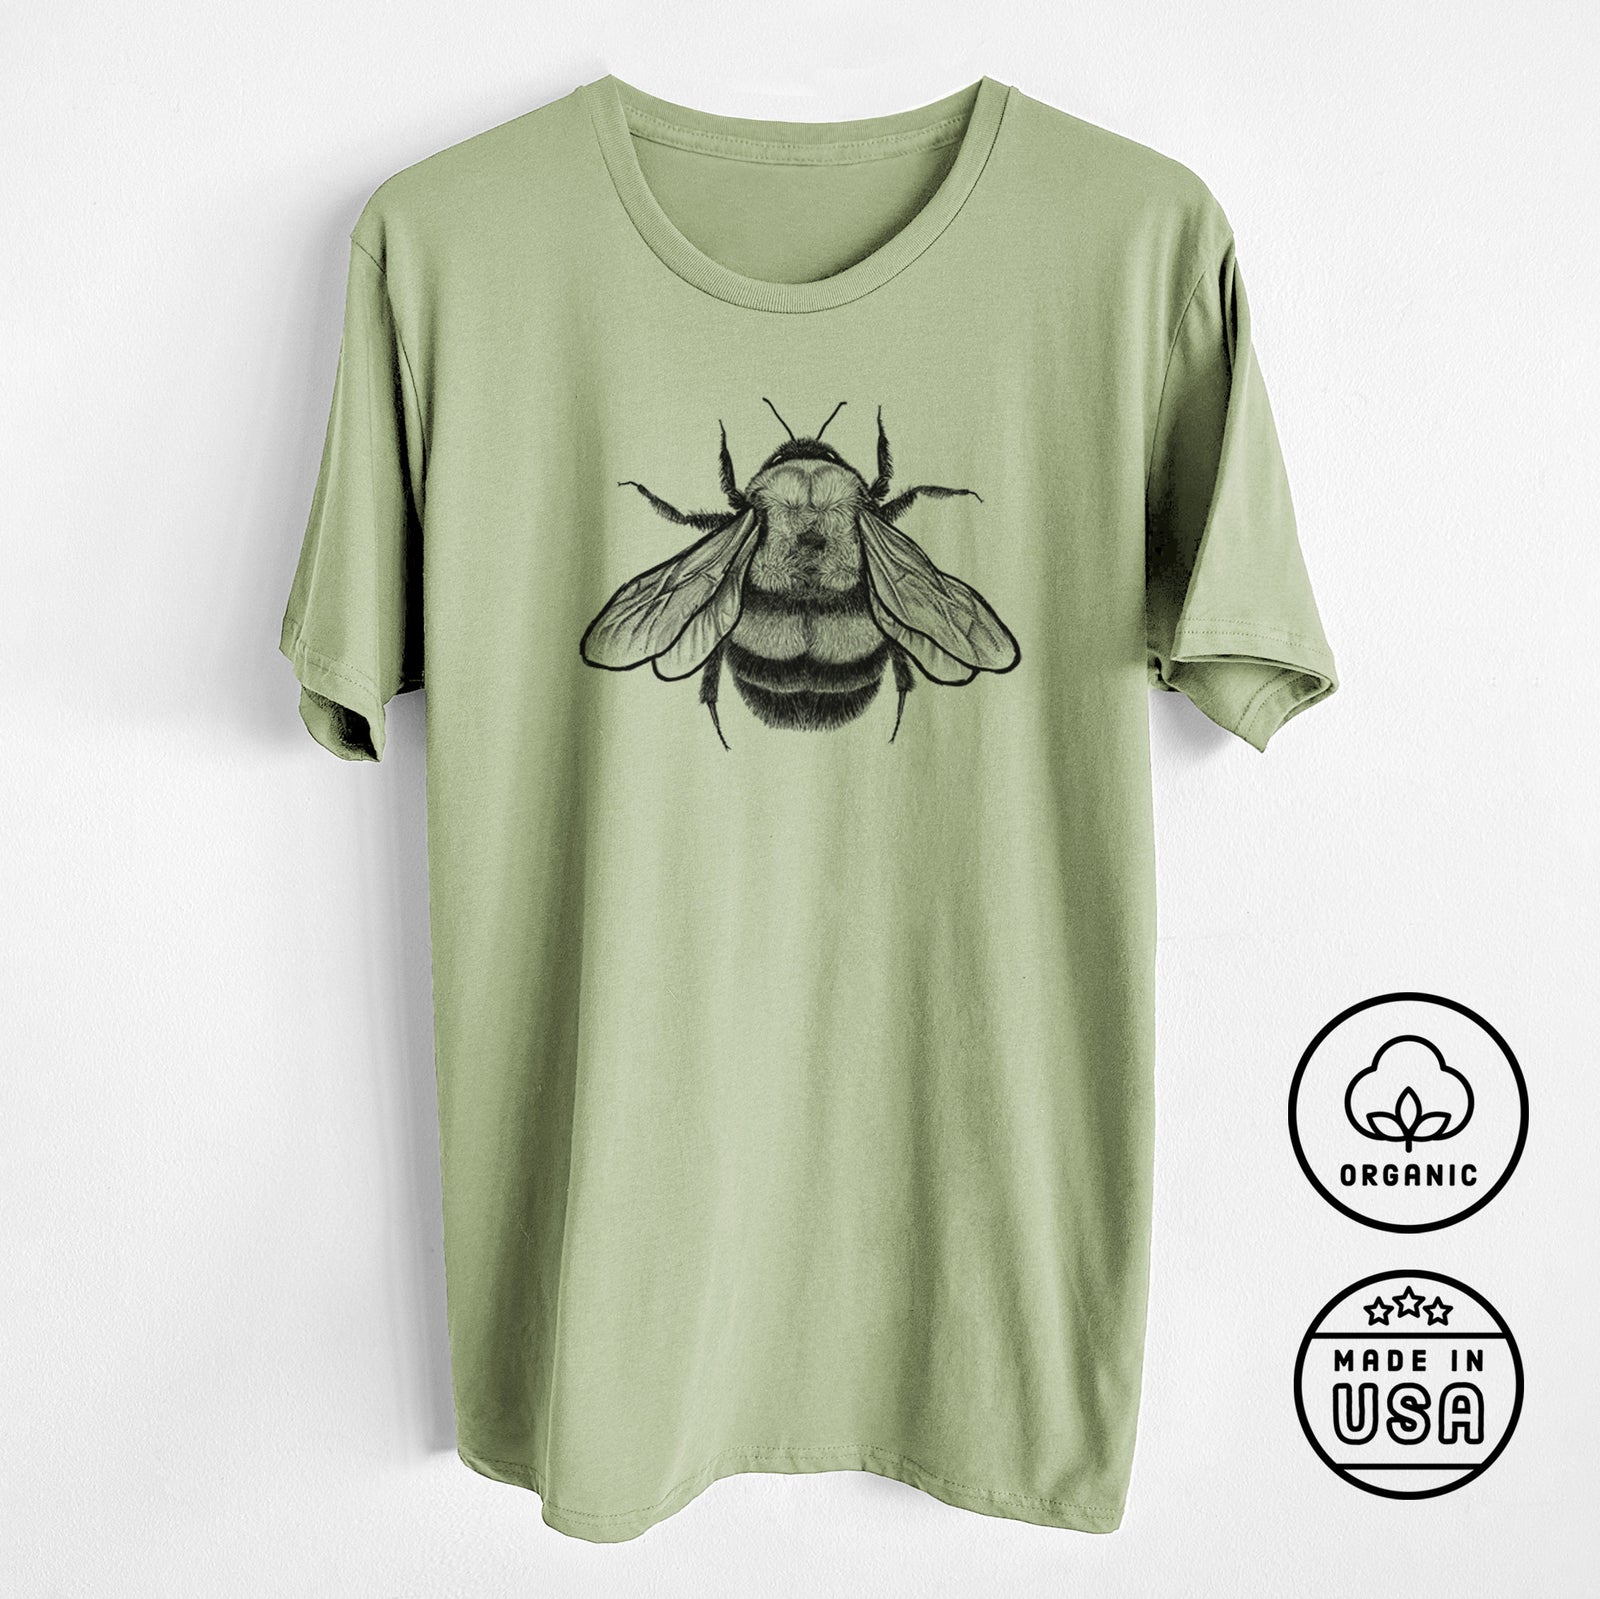 Bombus Affinis - Rusty-Patched Bumble Bee Hand Towel - Because Tees